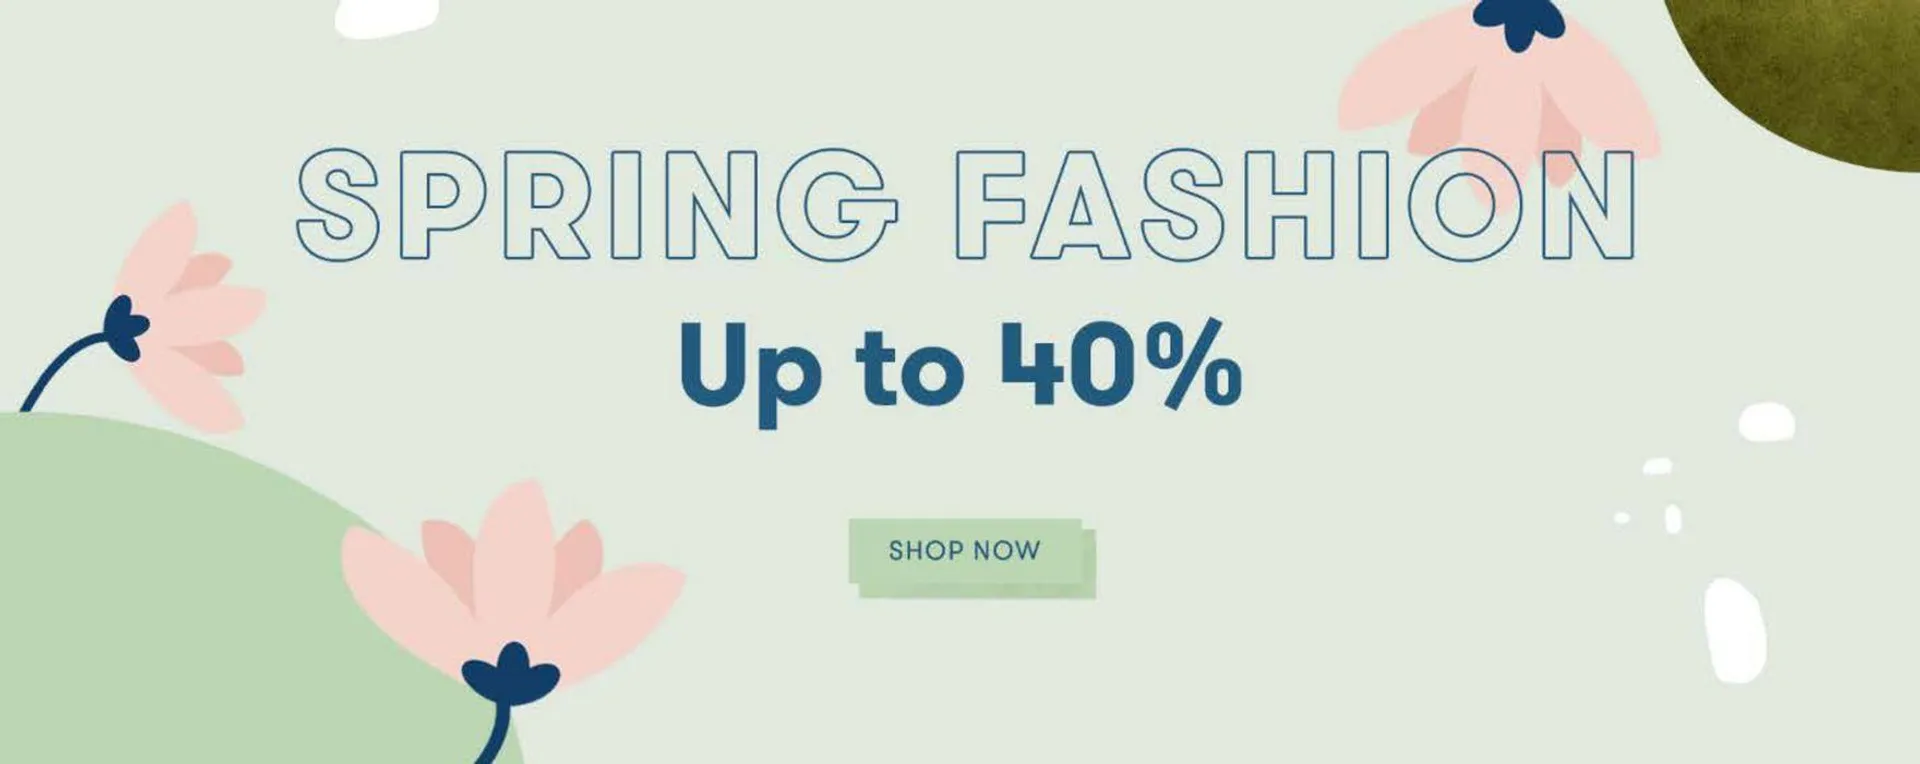 Spring Fashion Up To 40% - 1